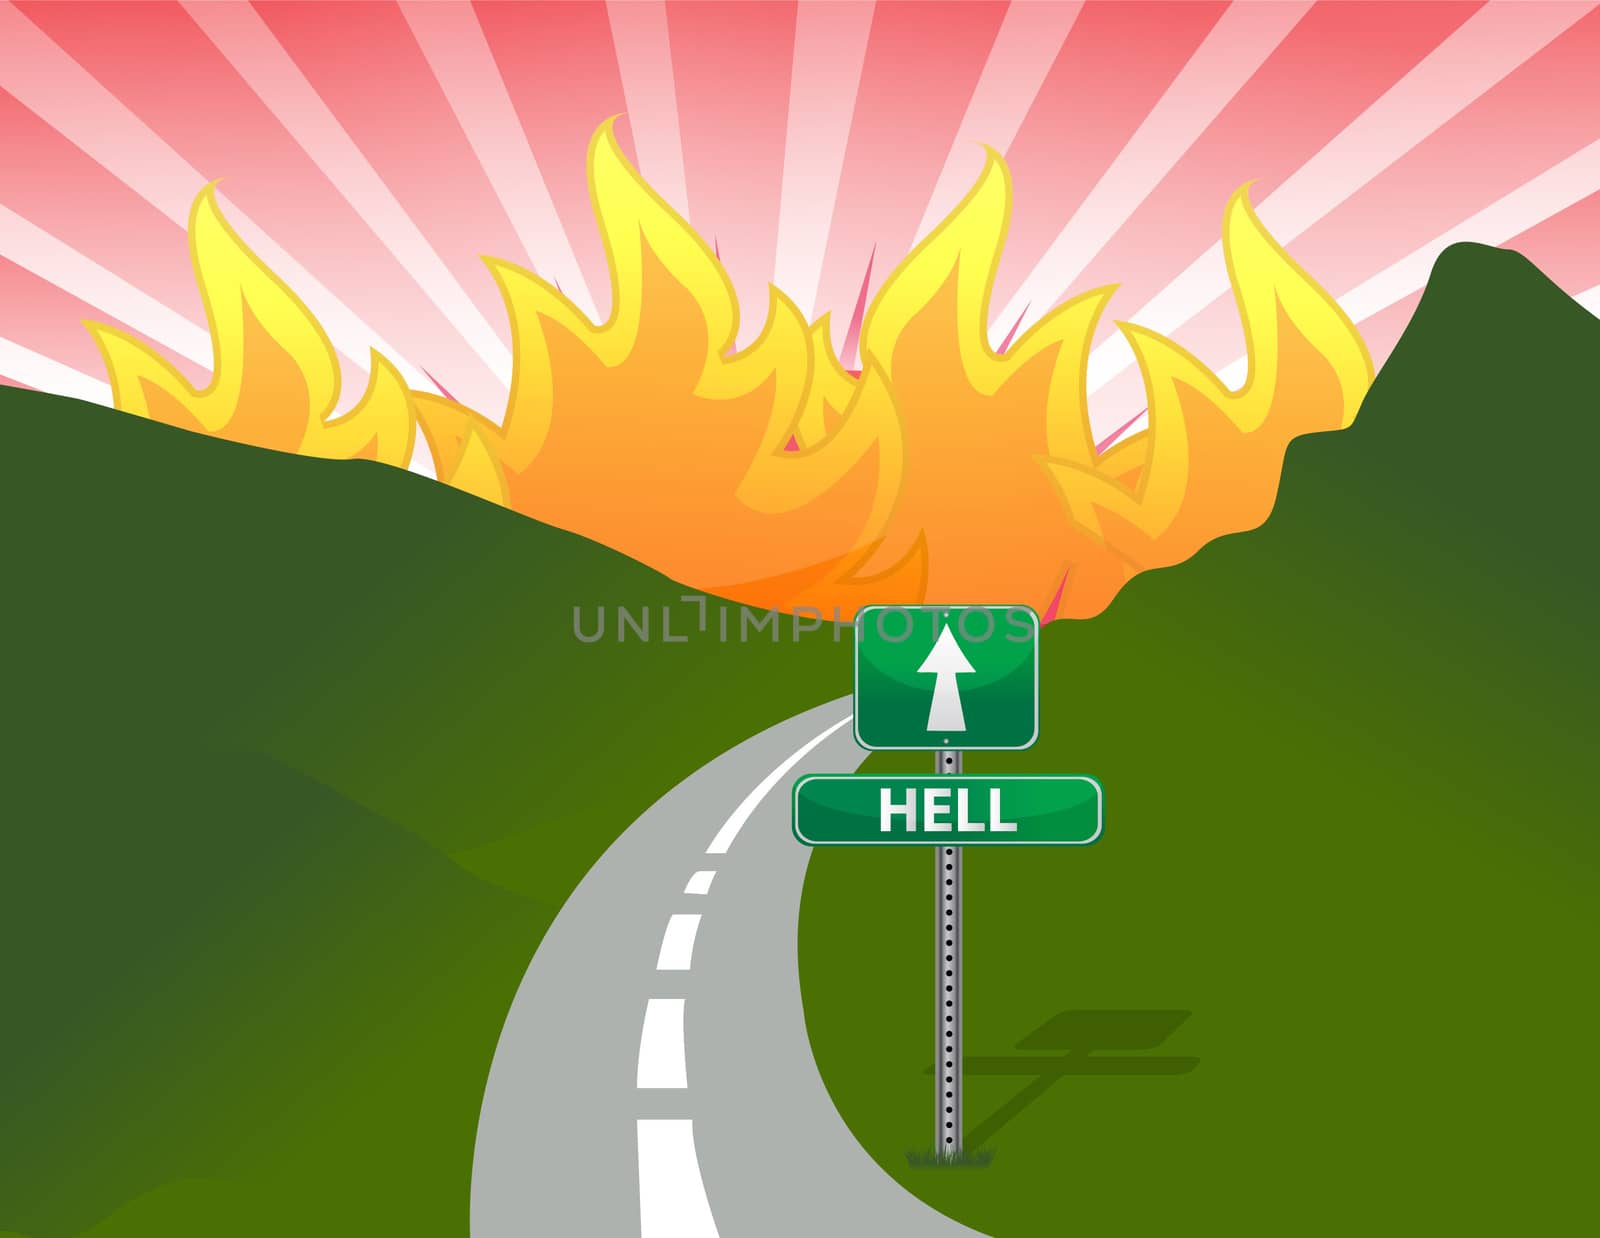 Road to hell concept illustration design